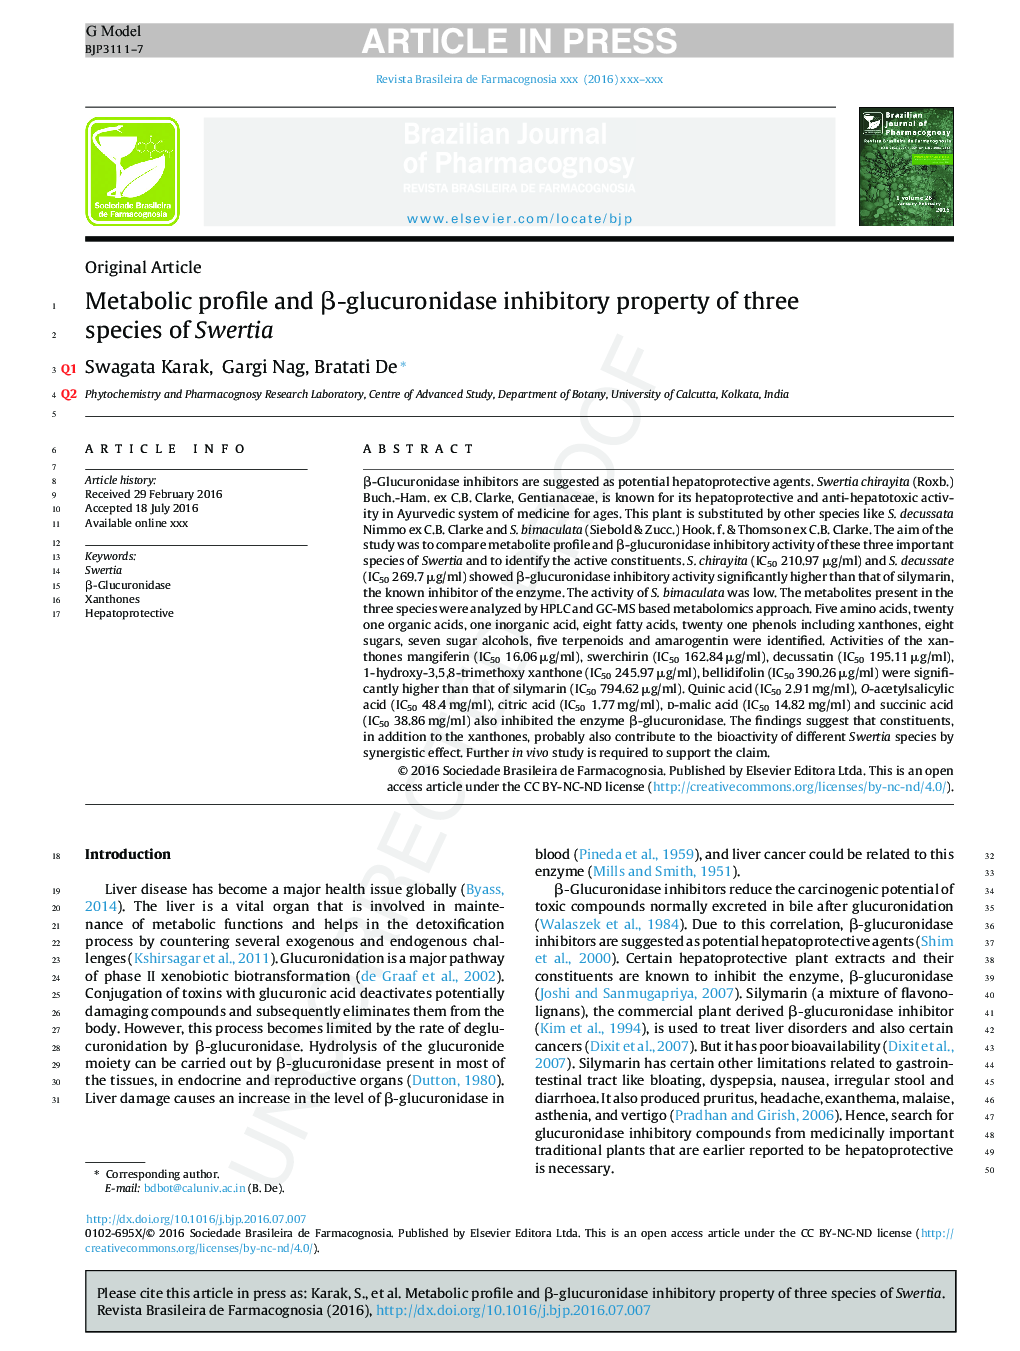 Metabolic profile and Î²-glucuronidase inhibitory property of three species of Swertia